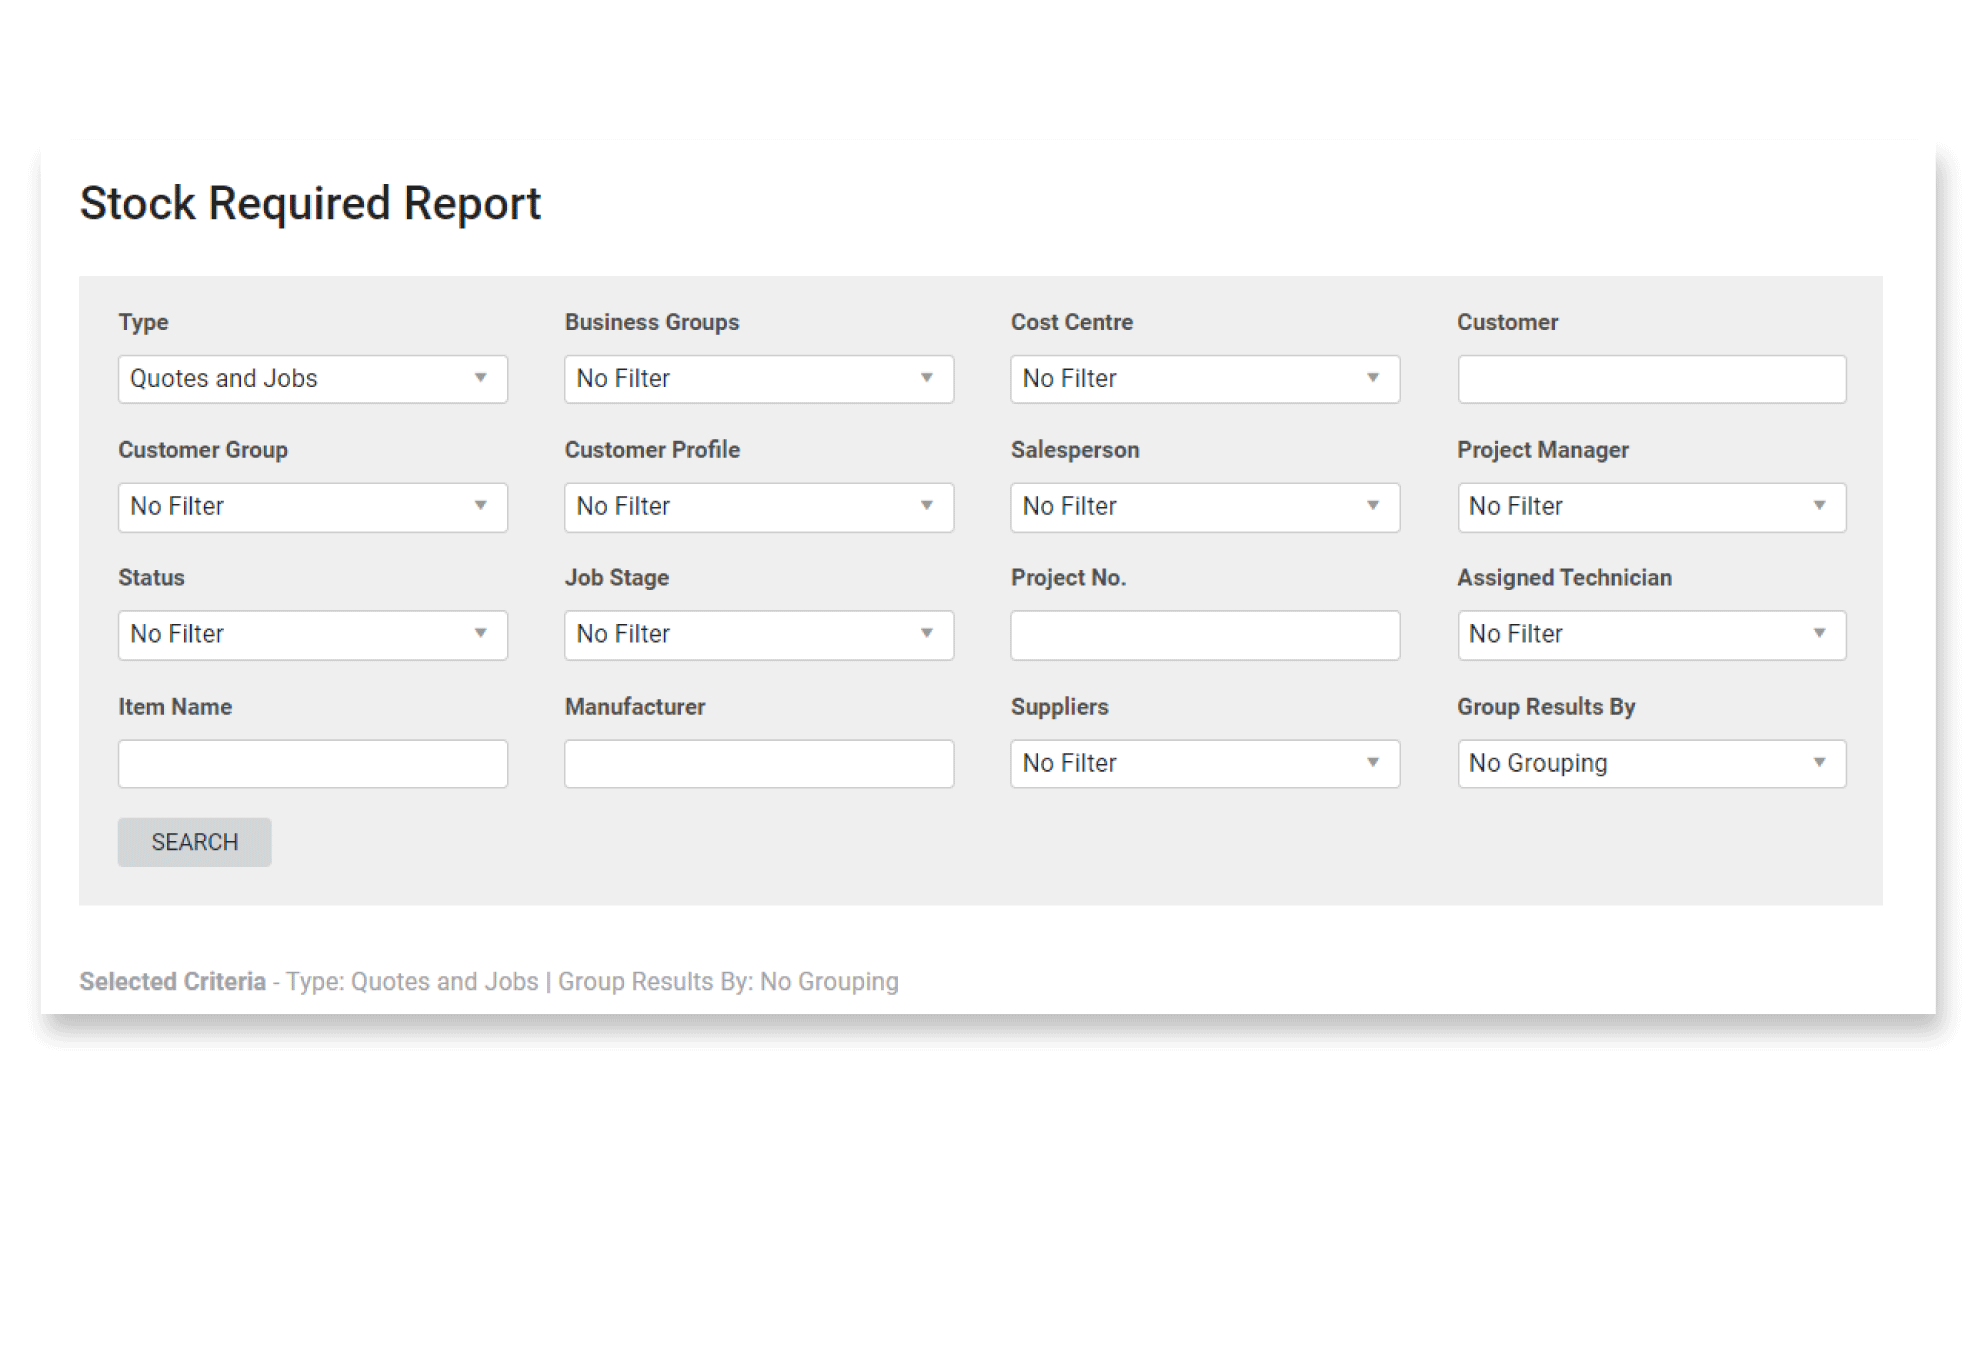 Stock Required Report composition